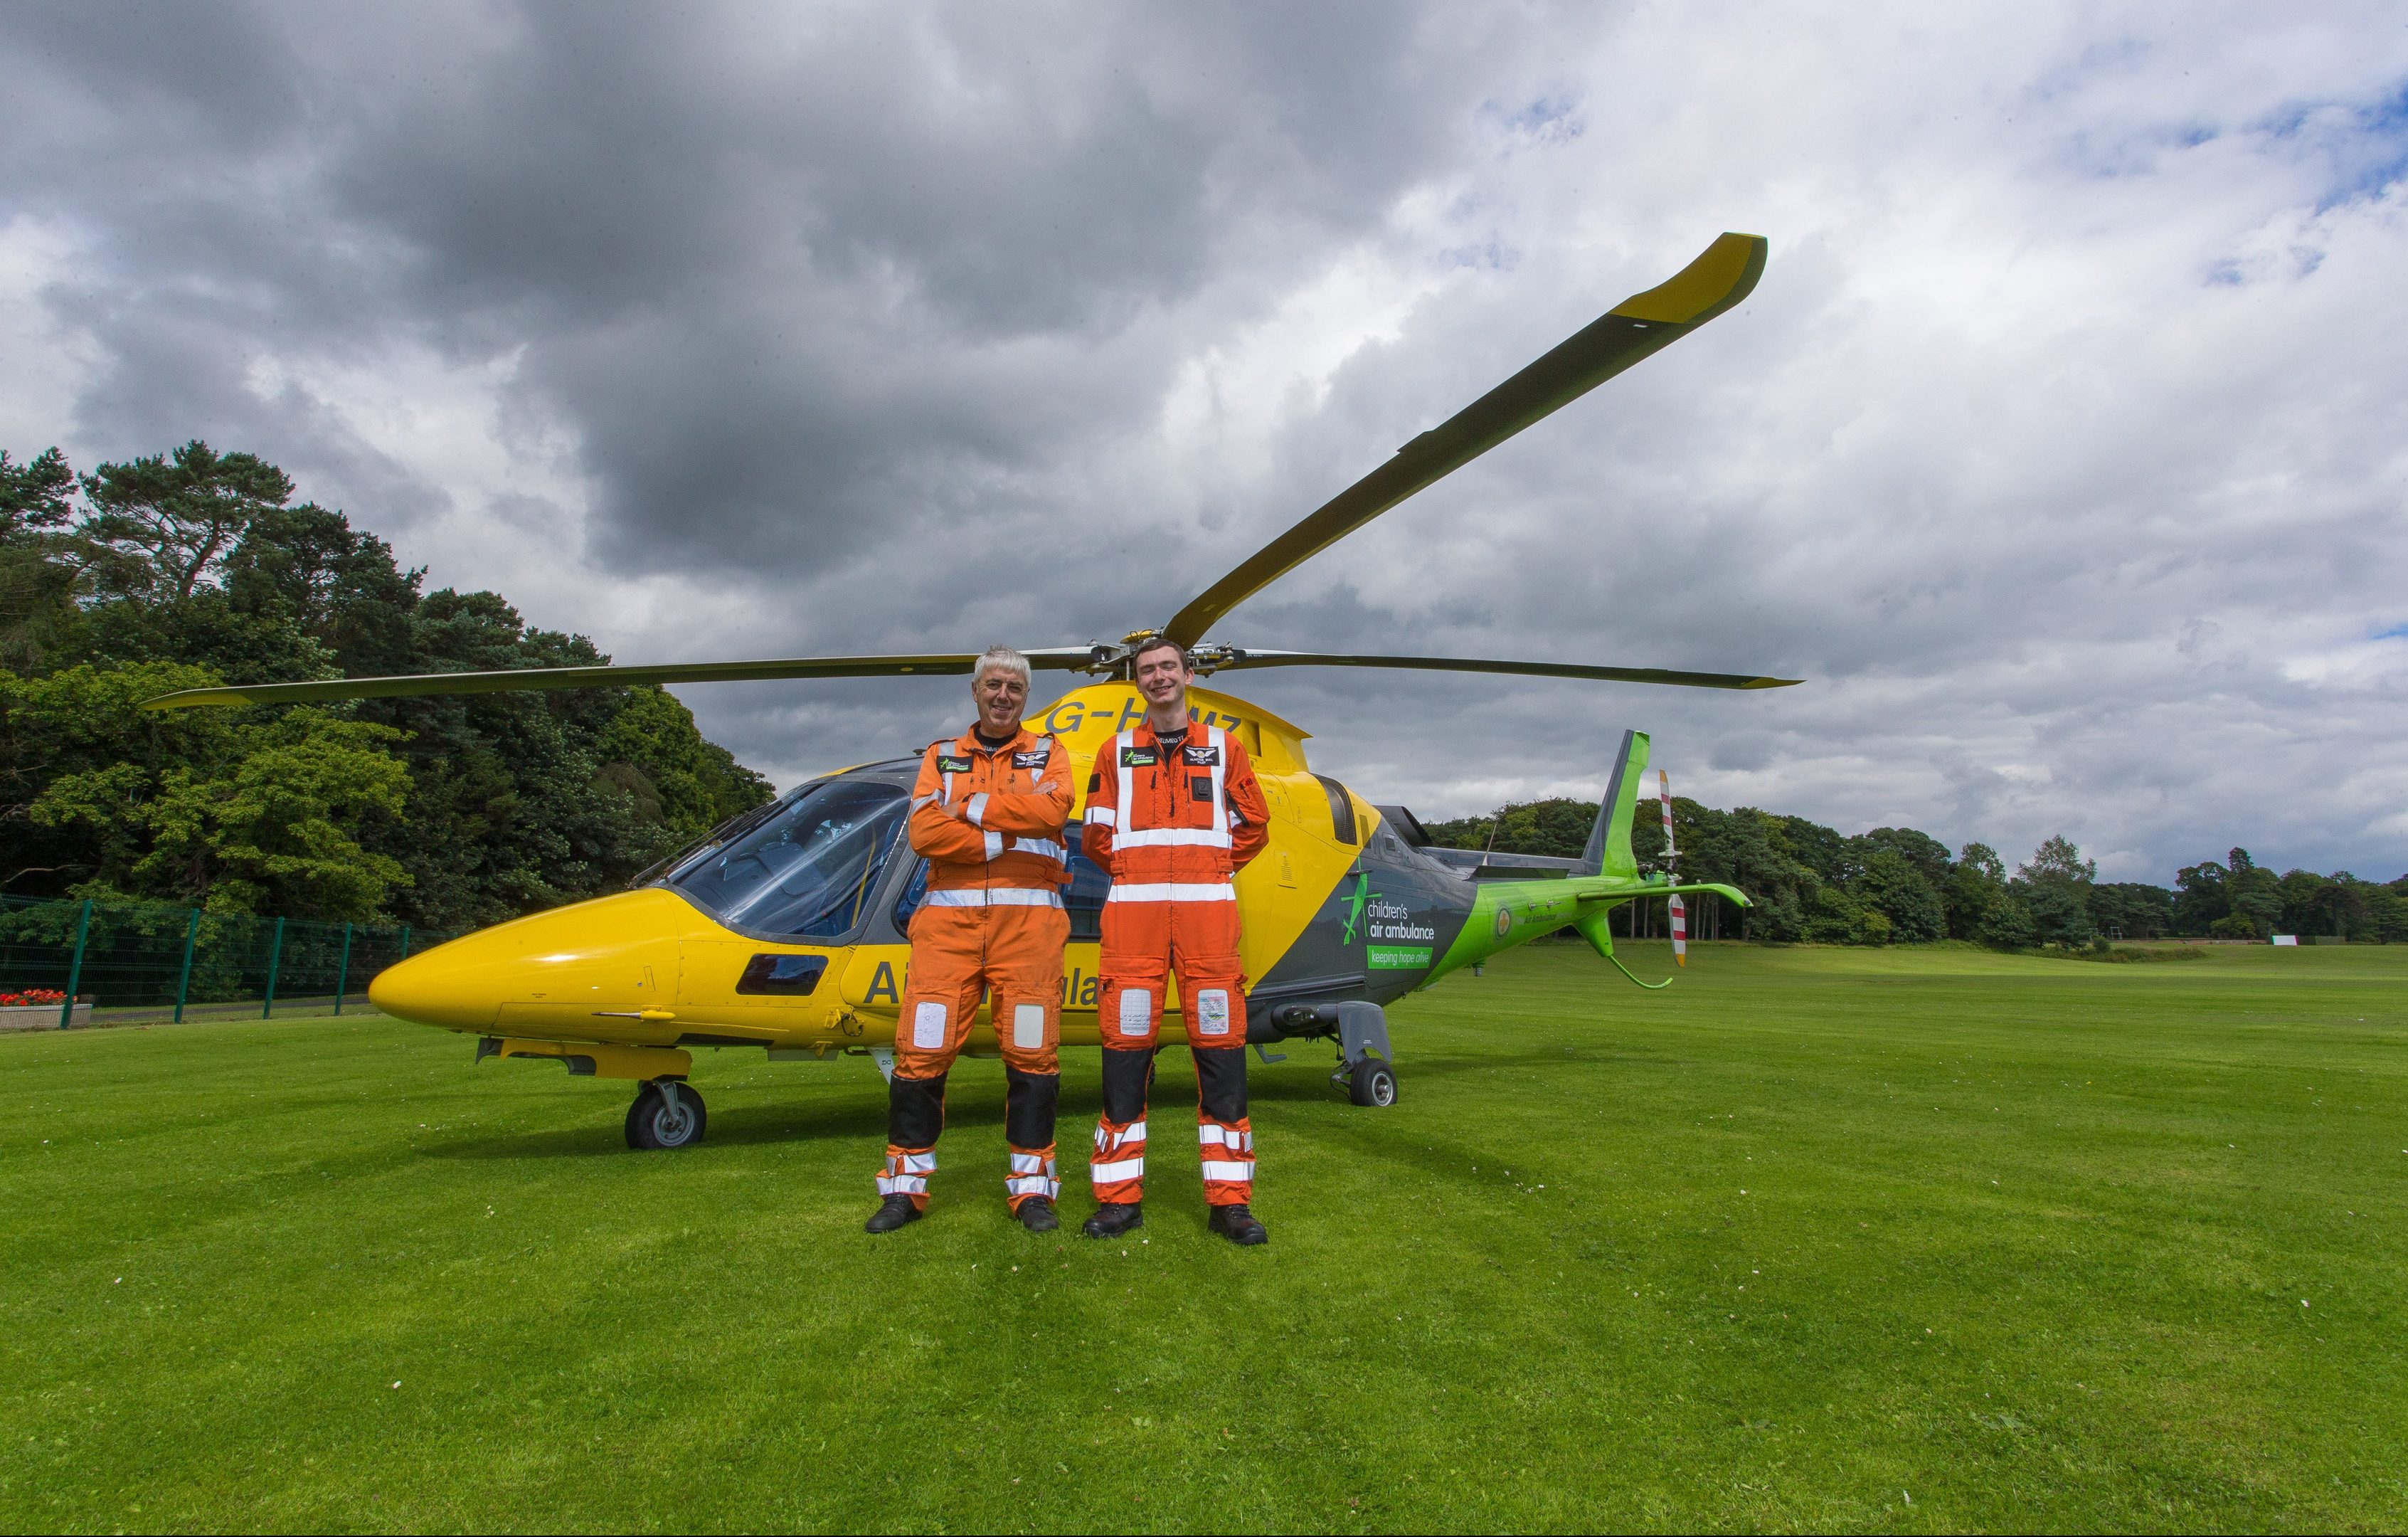 A spectacular patient transfer took place in Kirkcaldy today as an Air Ambulance landed in Dunnikier Park, Kirkcaldy. Pilots Mark Beardmore and Alistair Bull are pictured beside the Augusta 109-S air ambulance.